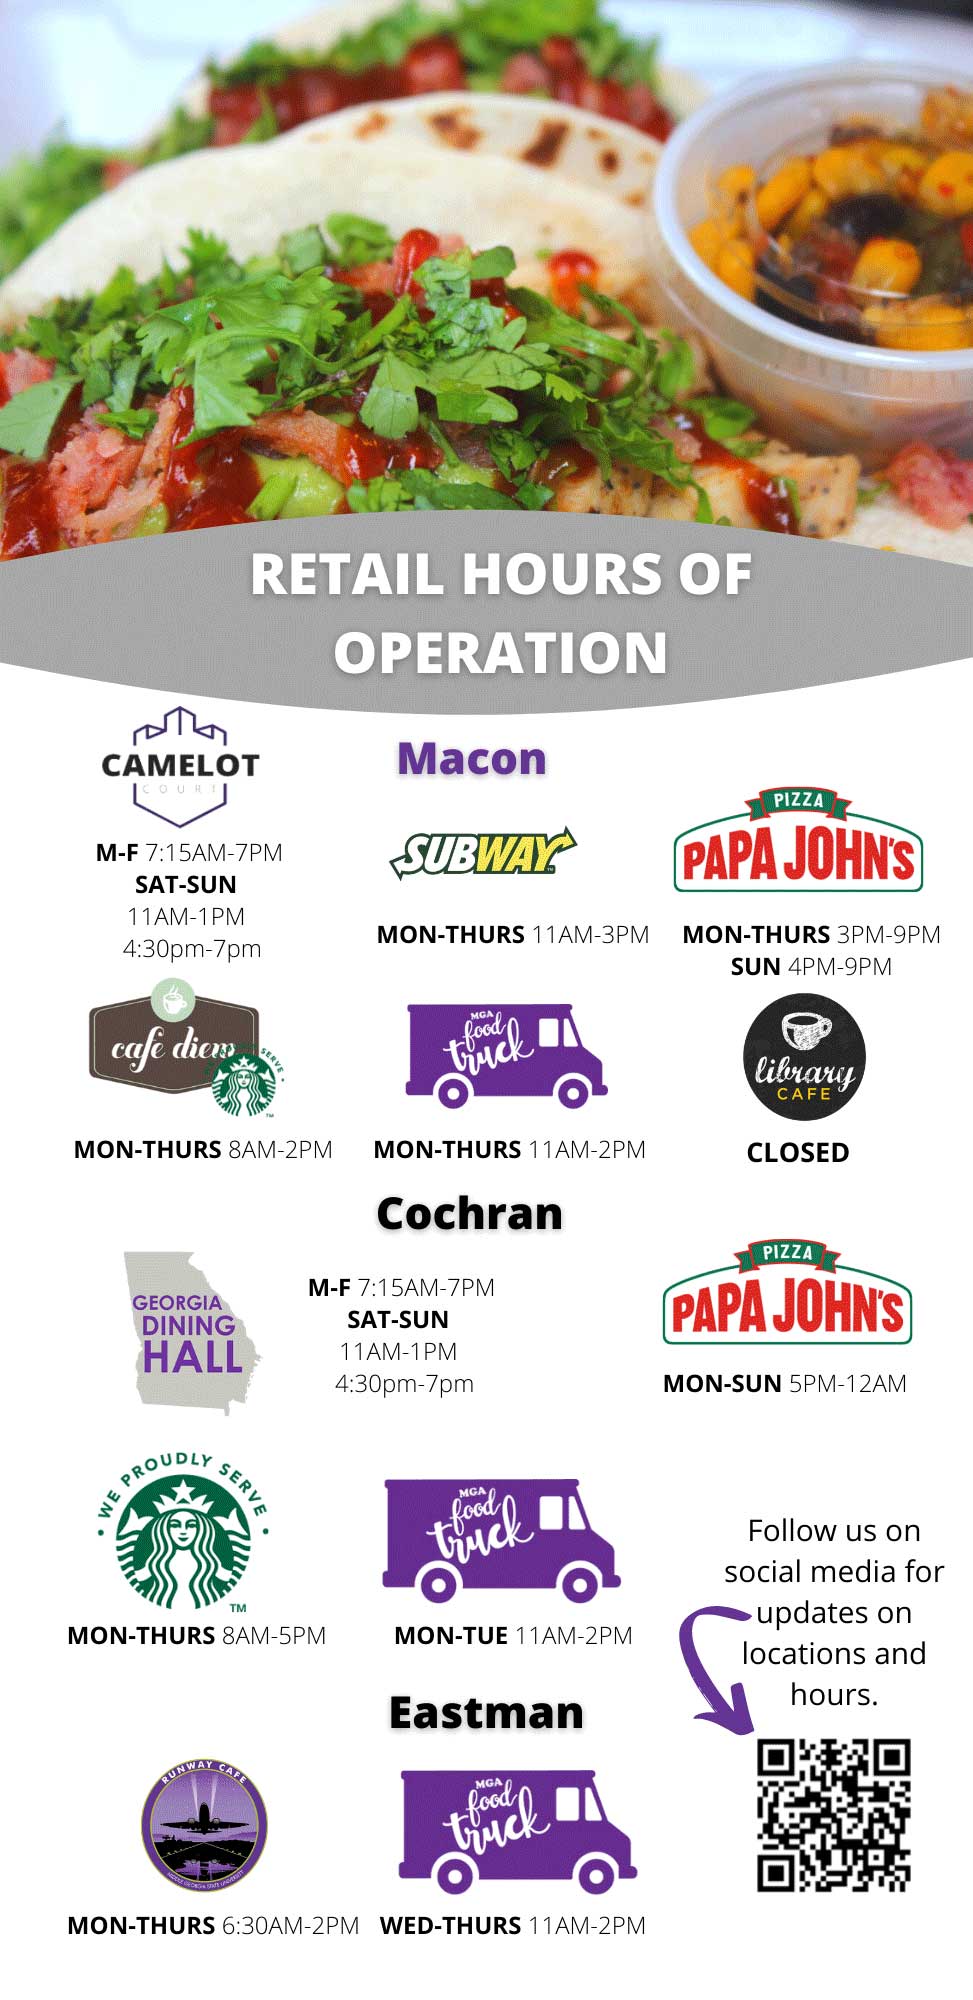 MGA dining hours of operation poster.